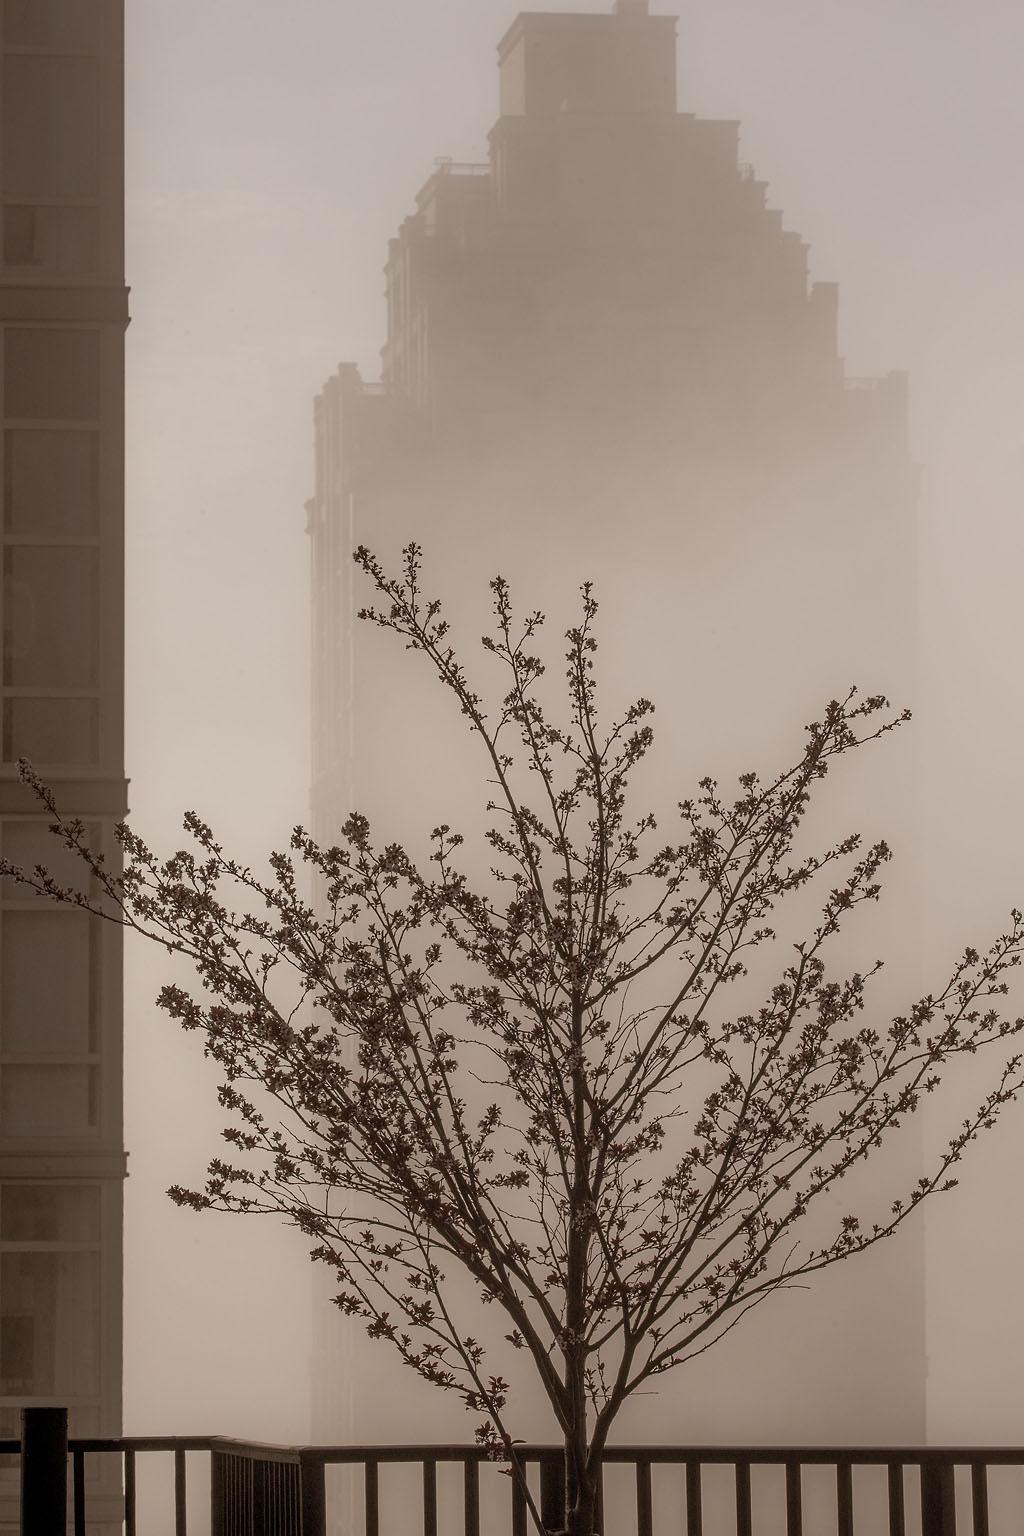 Allen Singer Color Photograph - "Rooftop Fog", Urban Photography, Architecture, Tree, New York City, Sepia